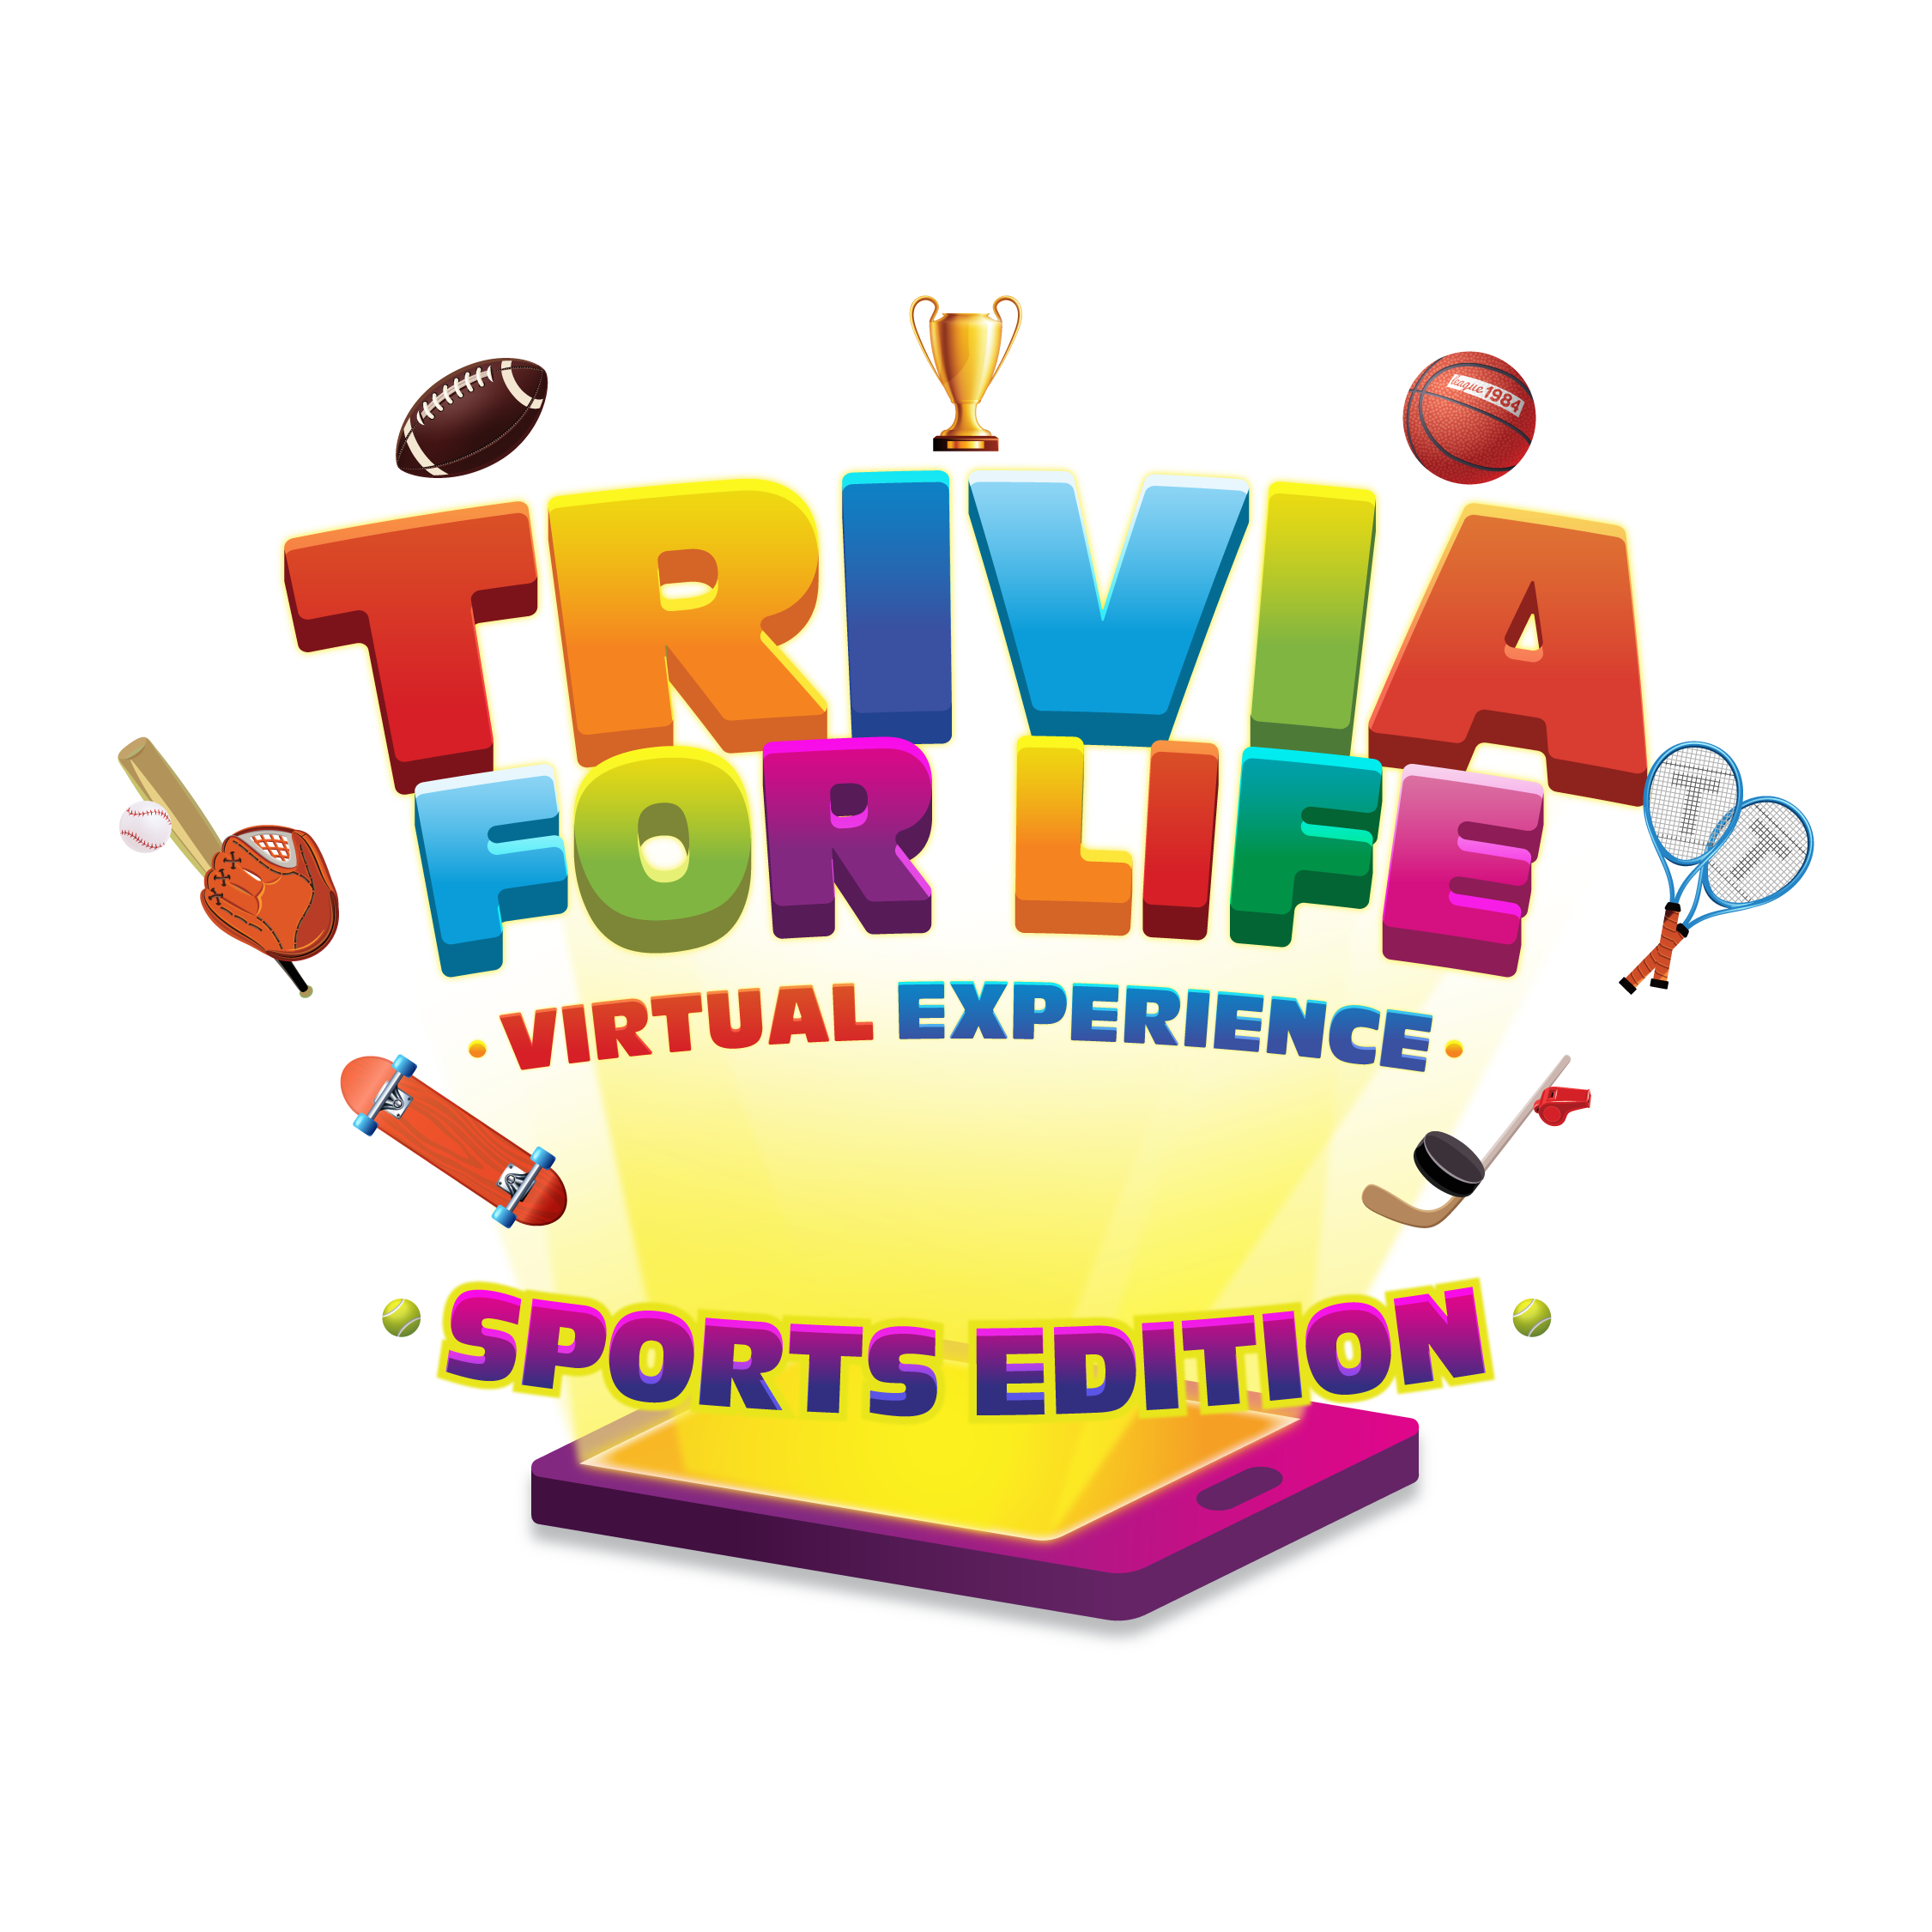 Trivia for Life Sports Edition Campaign